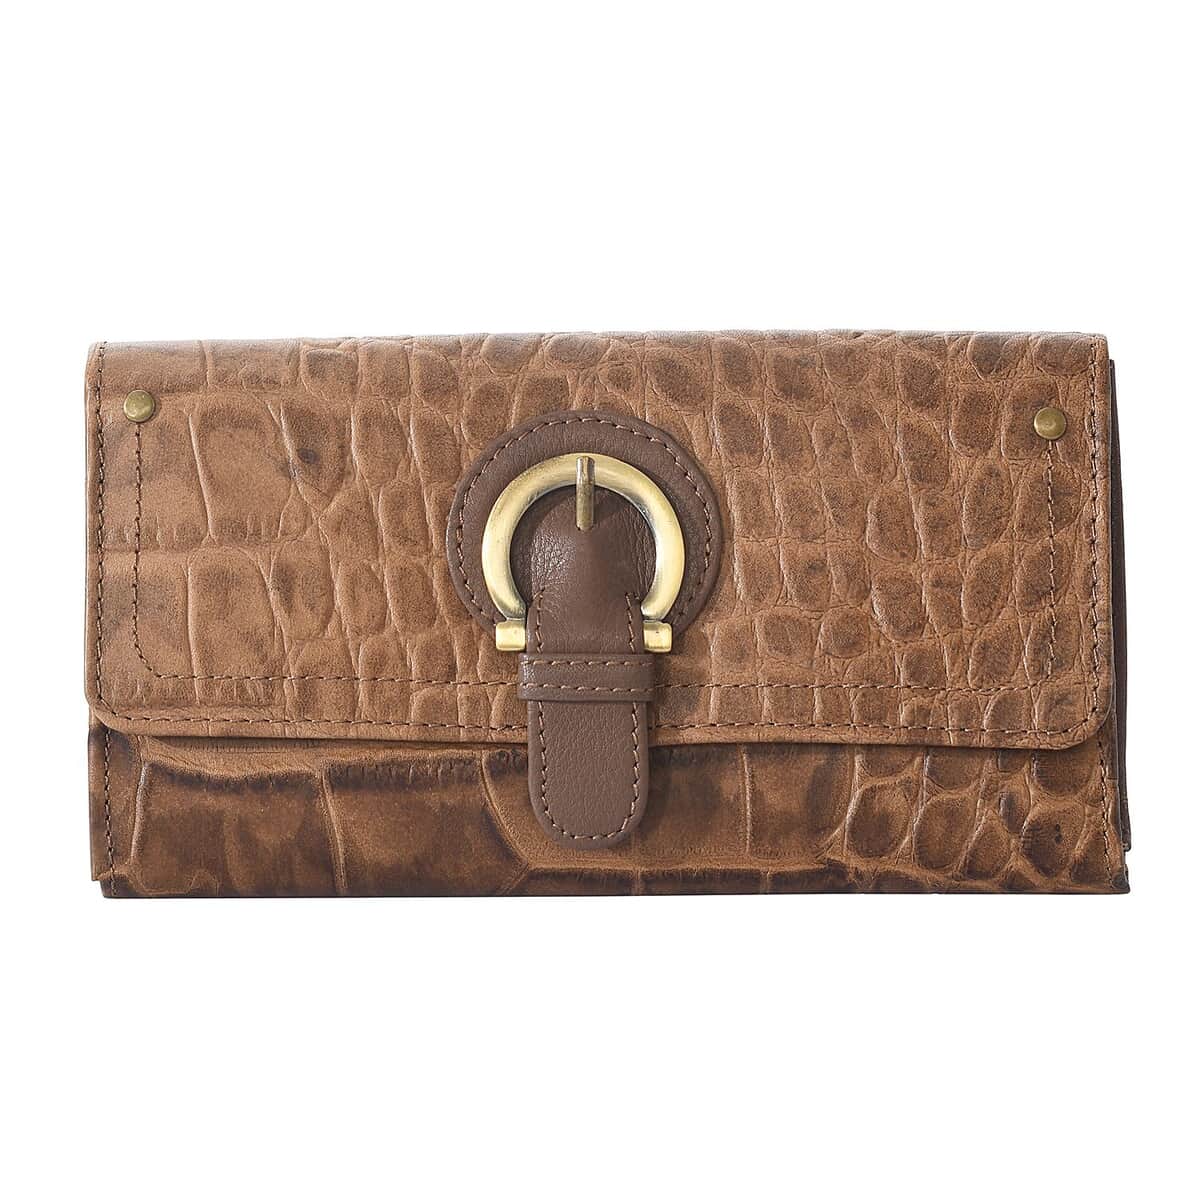 "UNION CODE -RFID Protected 100% Genuine Leather Women's Wallet SIZE: 7.5(L)x4.5(W) inches COLOR:DarkBrown" image number 0